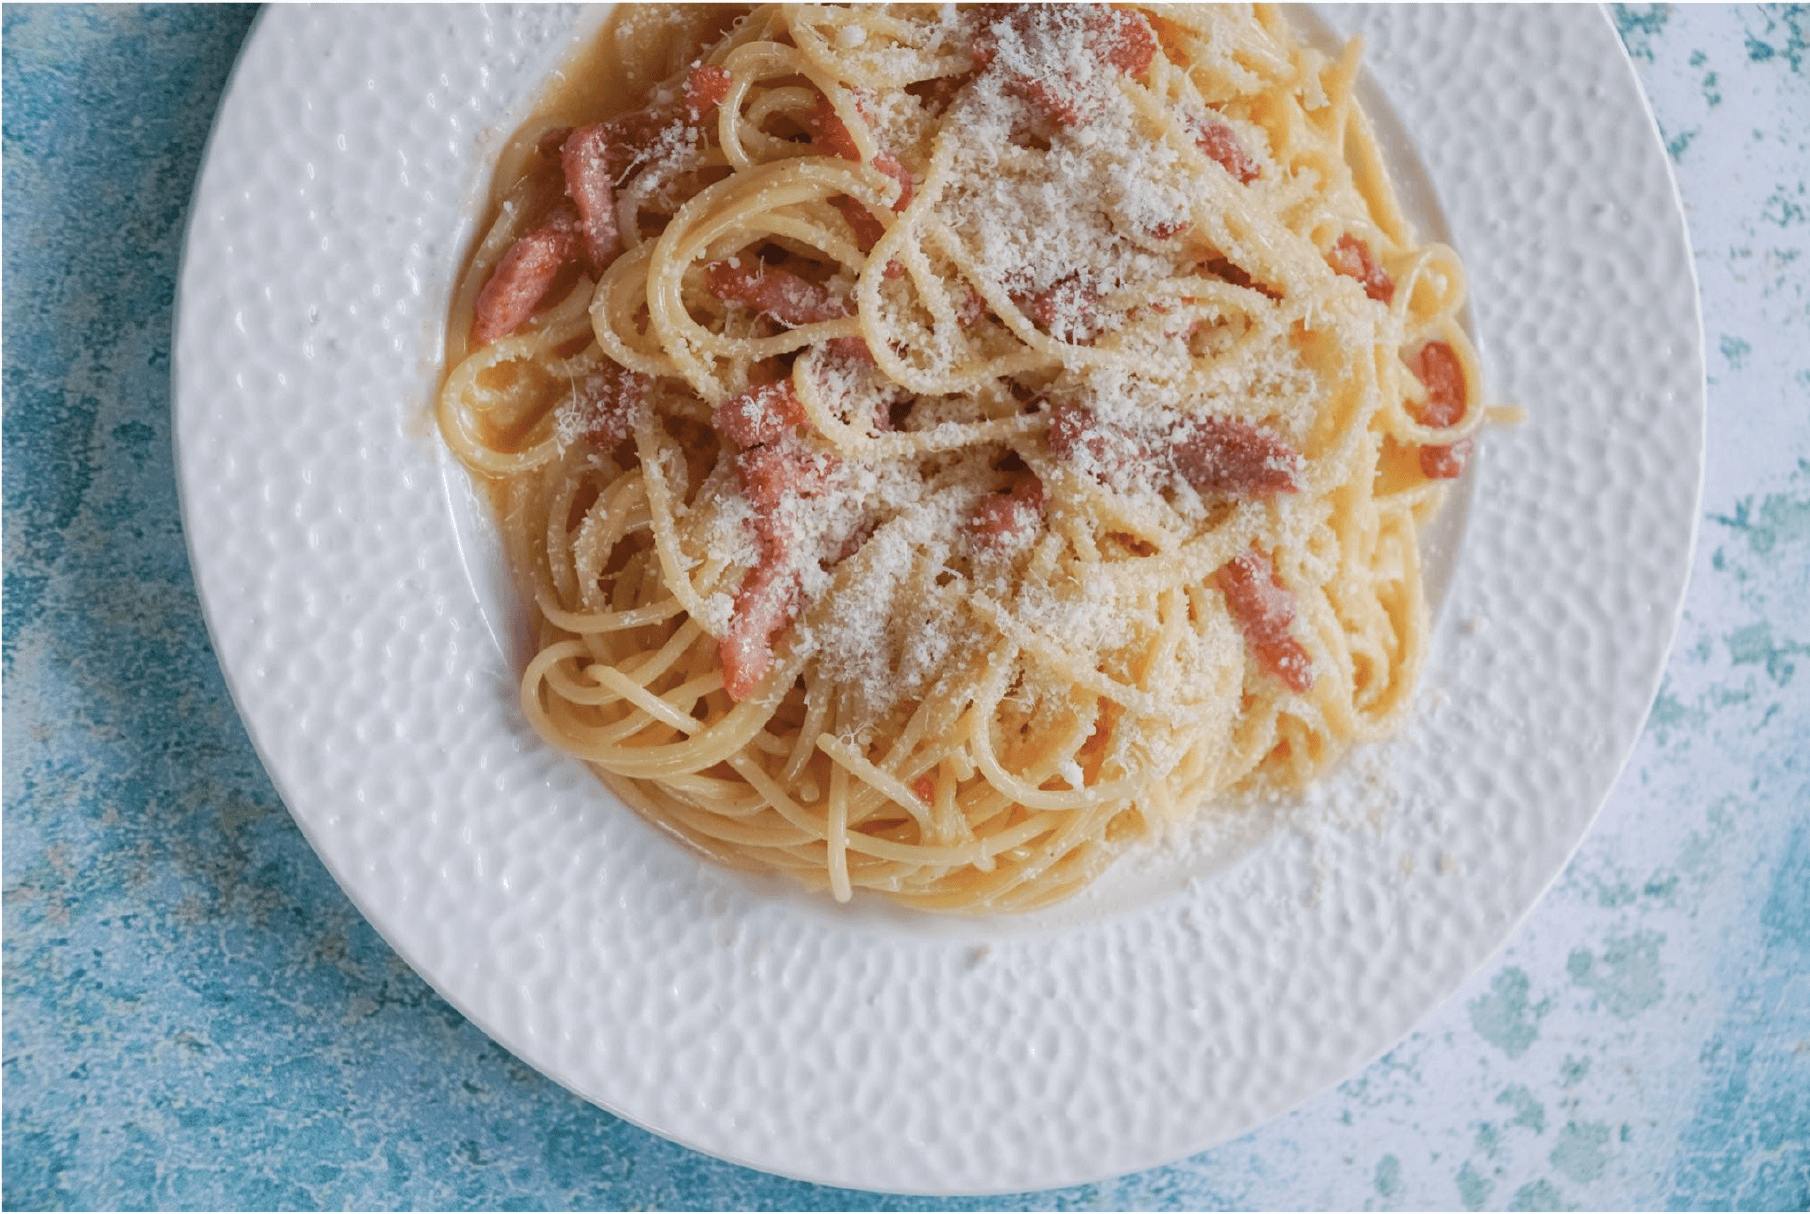 pasta carbonara topped with bacon and parmesan on a white plate, with a blue background